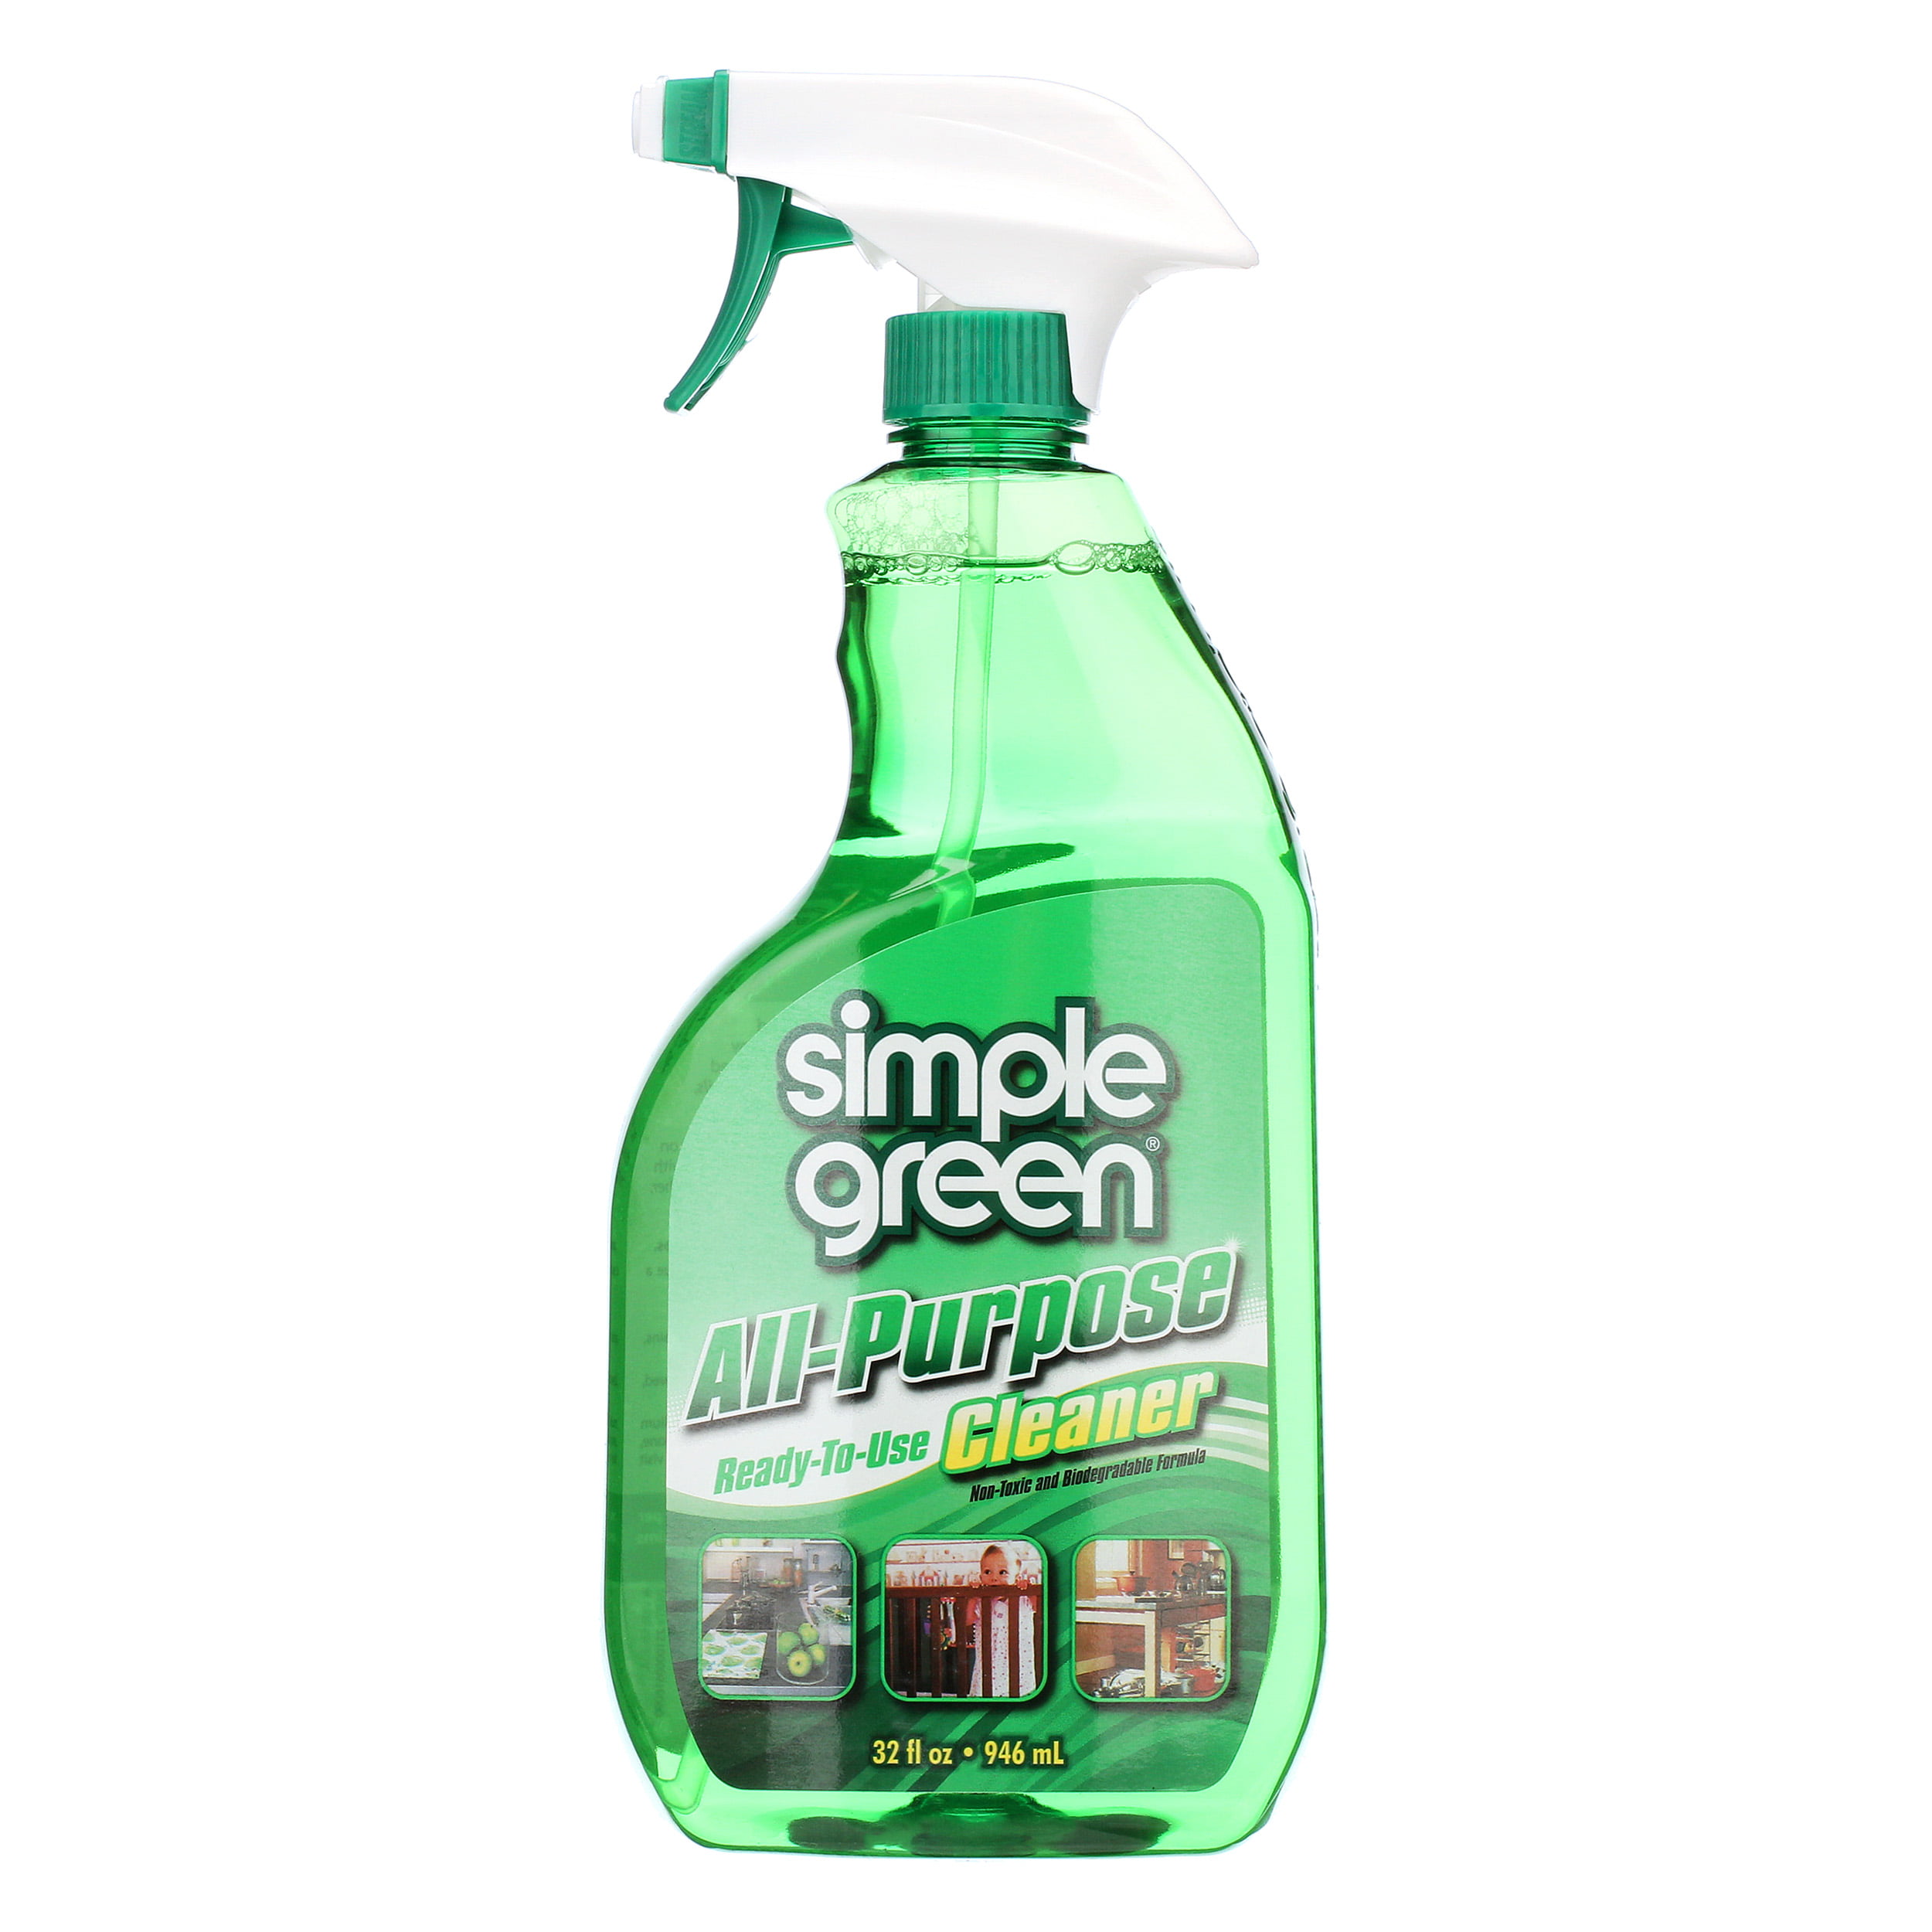 non toxic biodegradable cleaning products